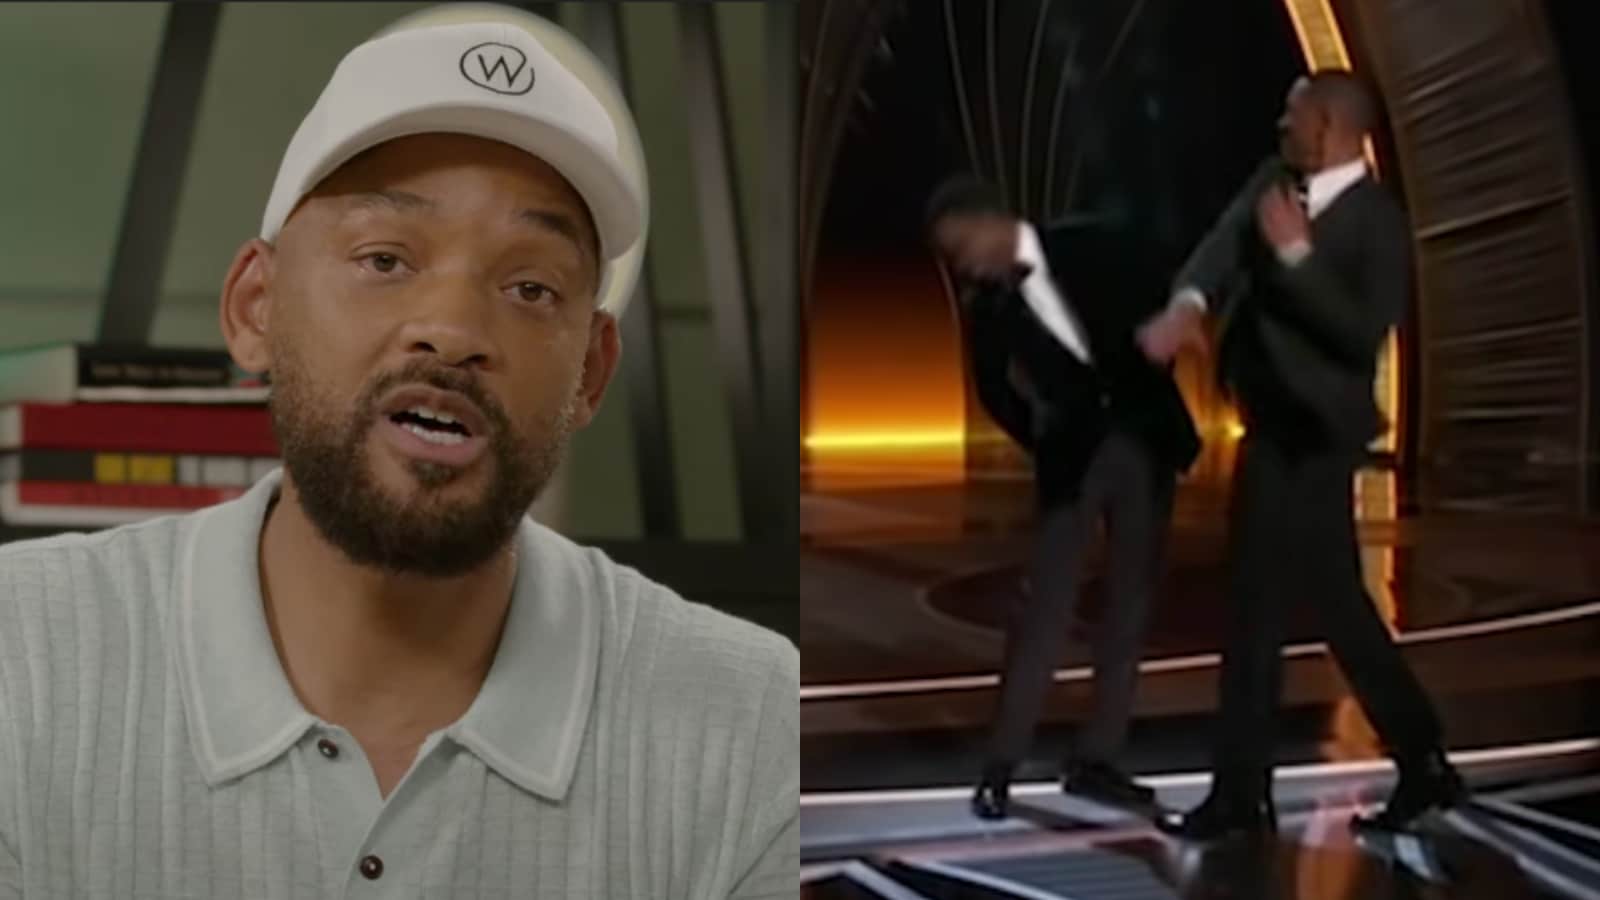 Will Smith's apology video and Will Smith slapping Chris Rock at the Oscars